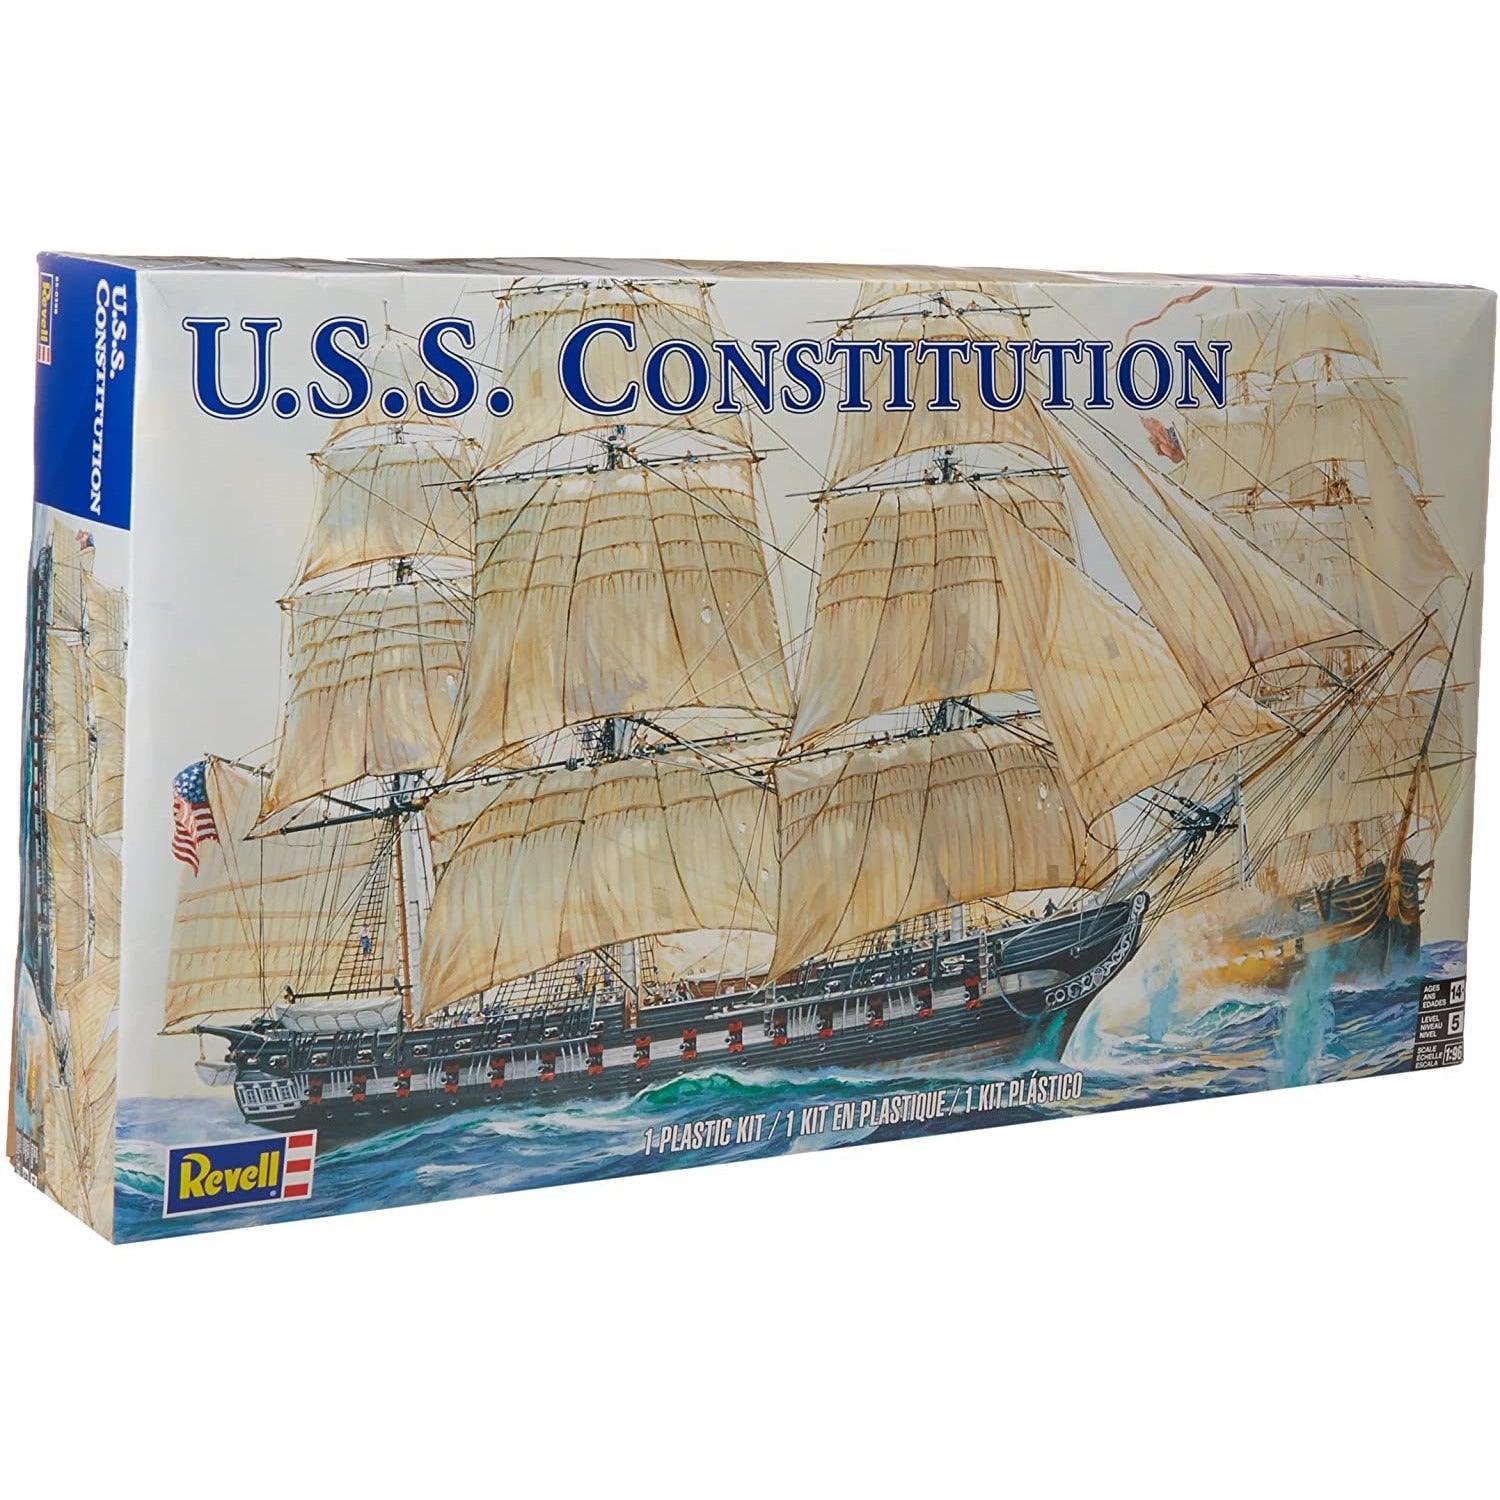 USS Constitution 1/96 Model Sailing Ship #0398 by Revell